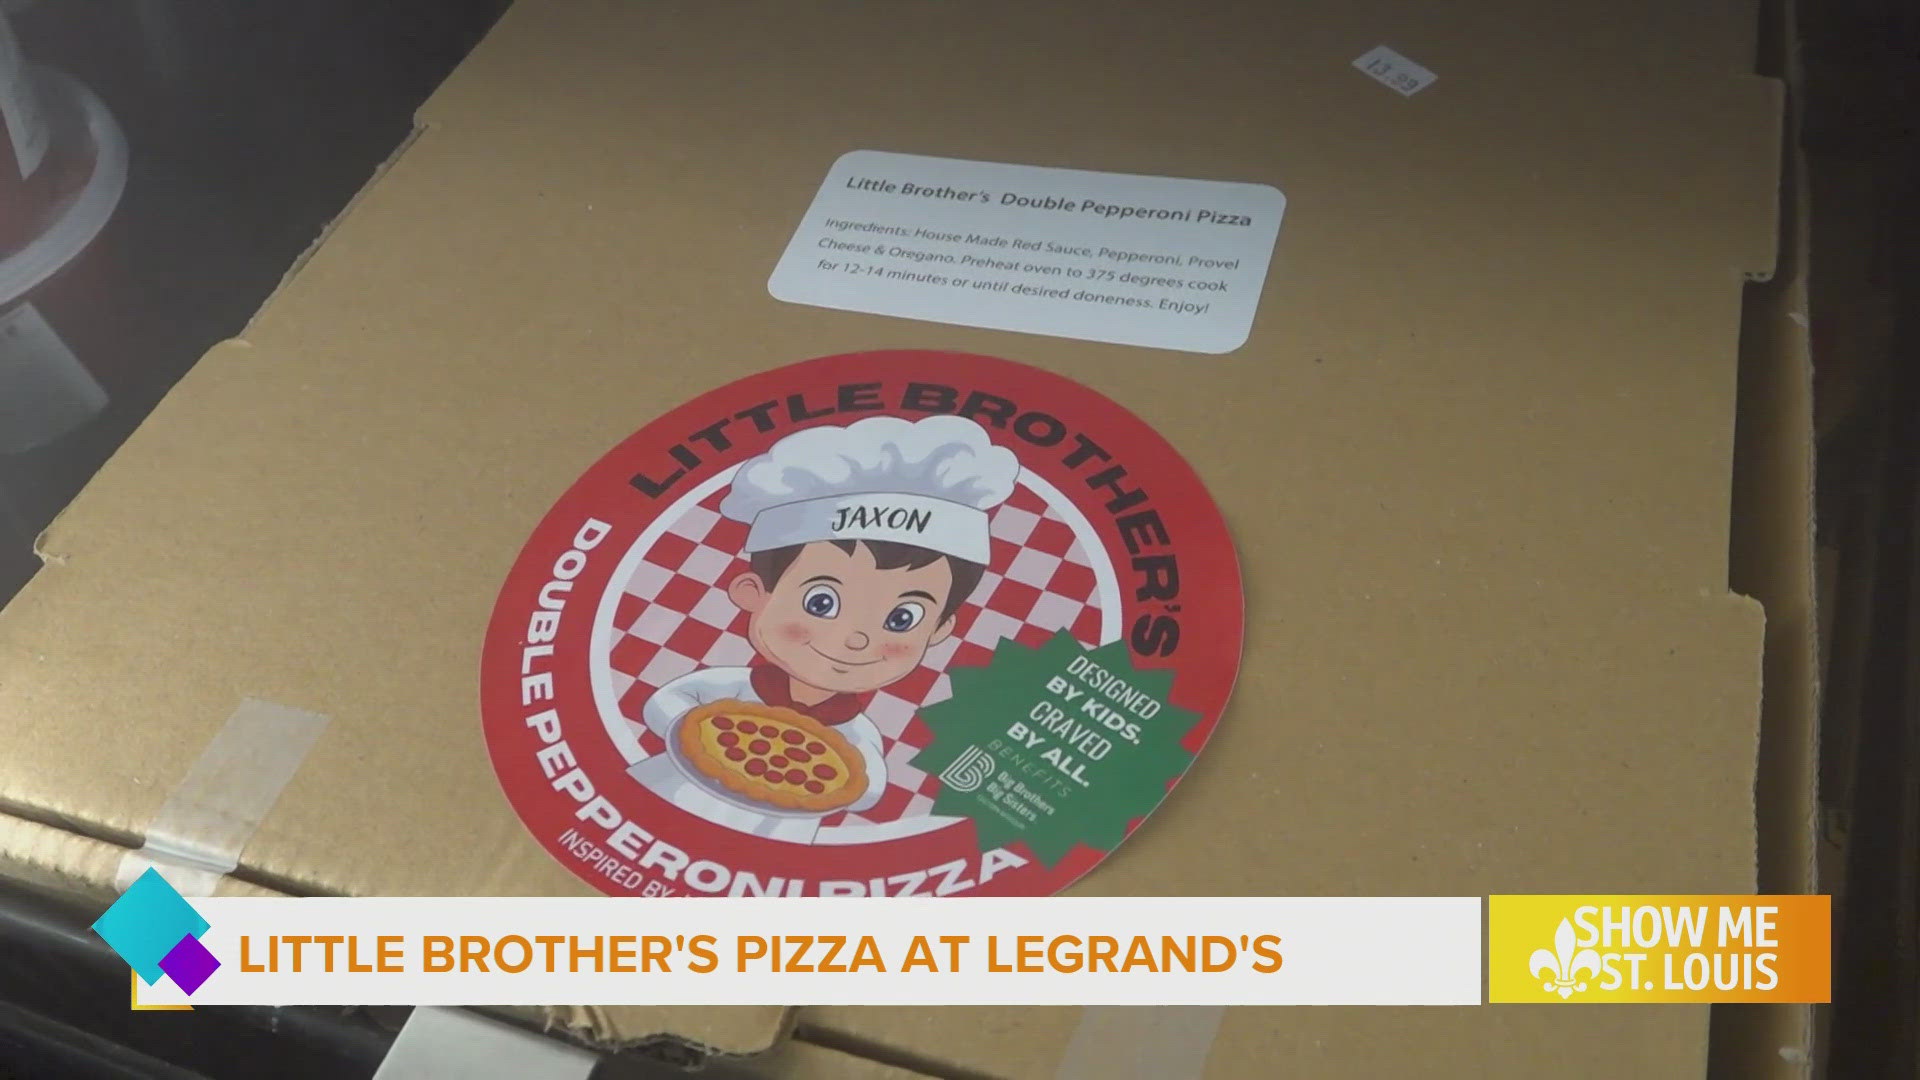 Add Little Brother's Double Pepperoni Pizza to your shopping list this summer. Mary Thaier gives us an inside look at where it all started.